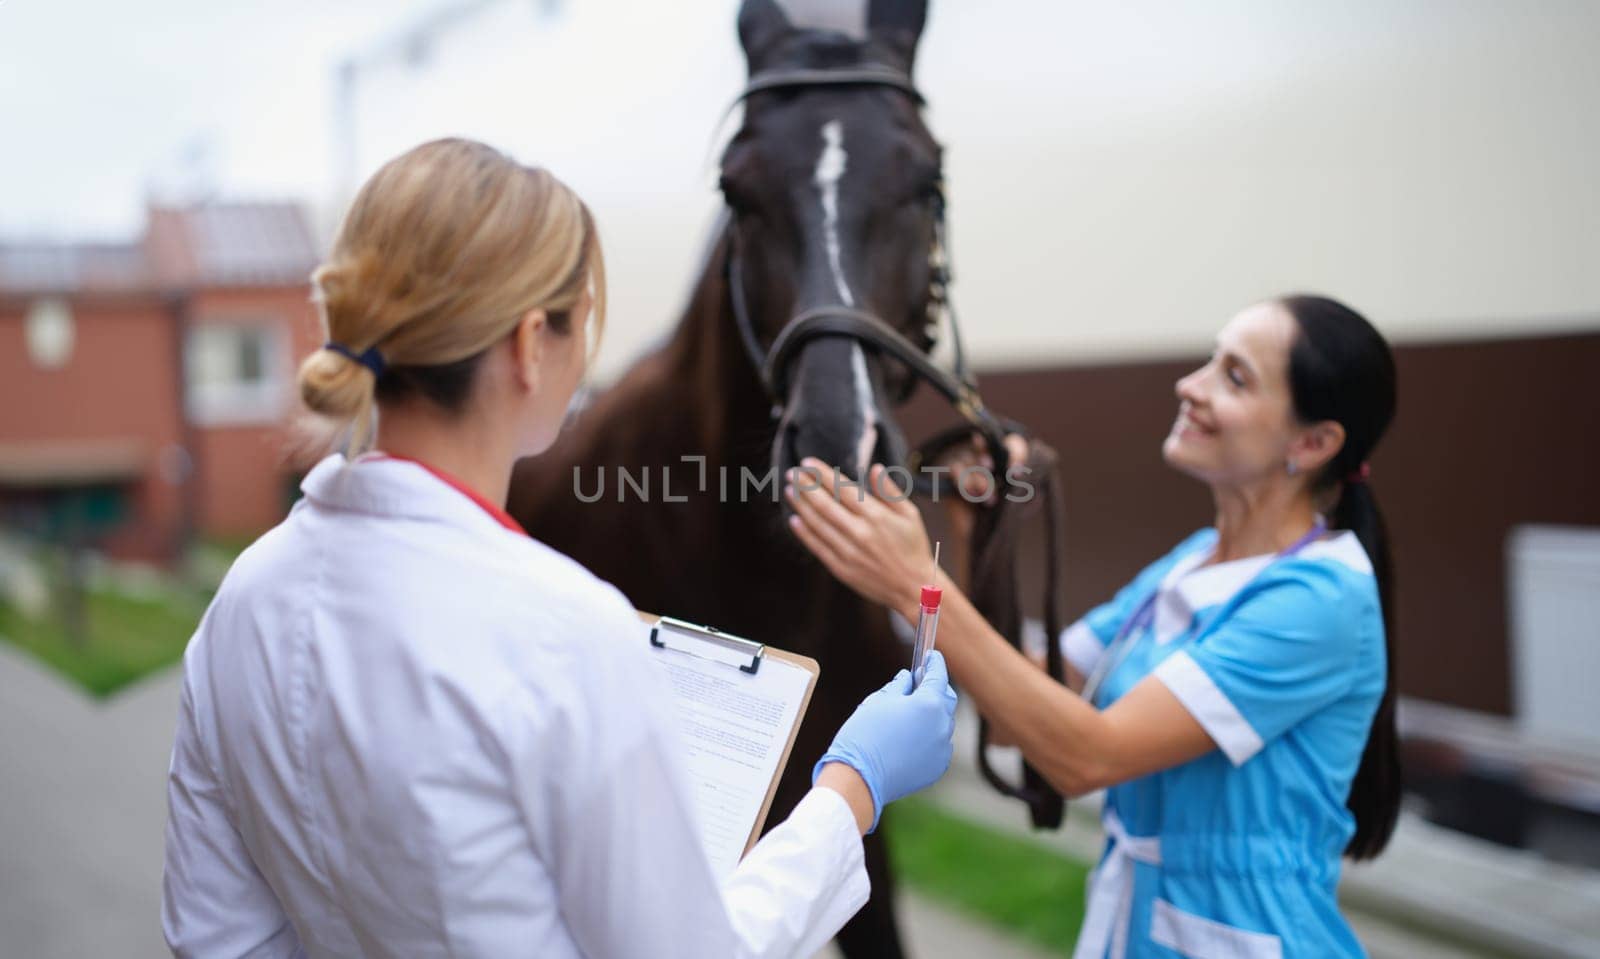 Two veterinarians conduct medical examination of thoroughbred horse by kuprevich